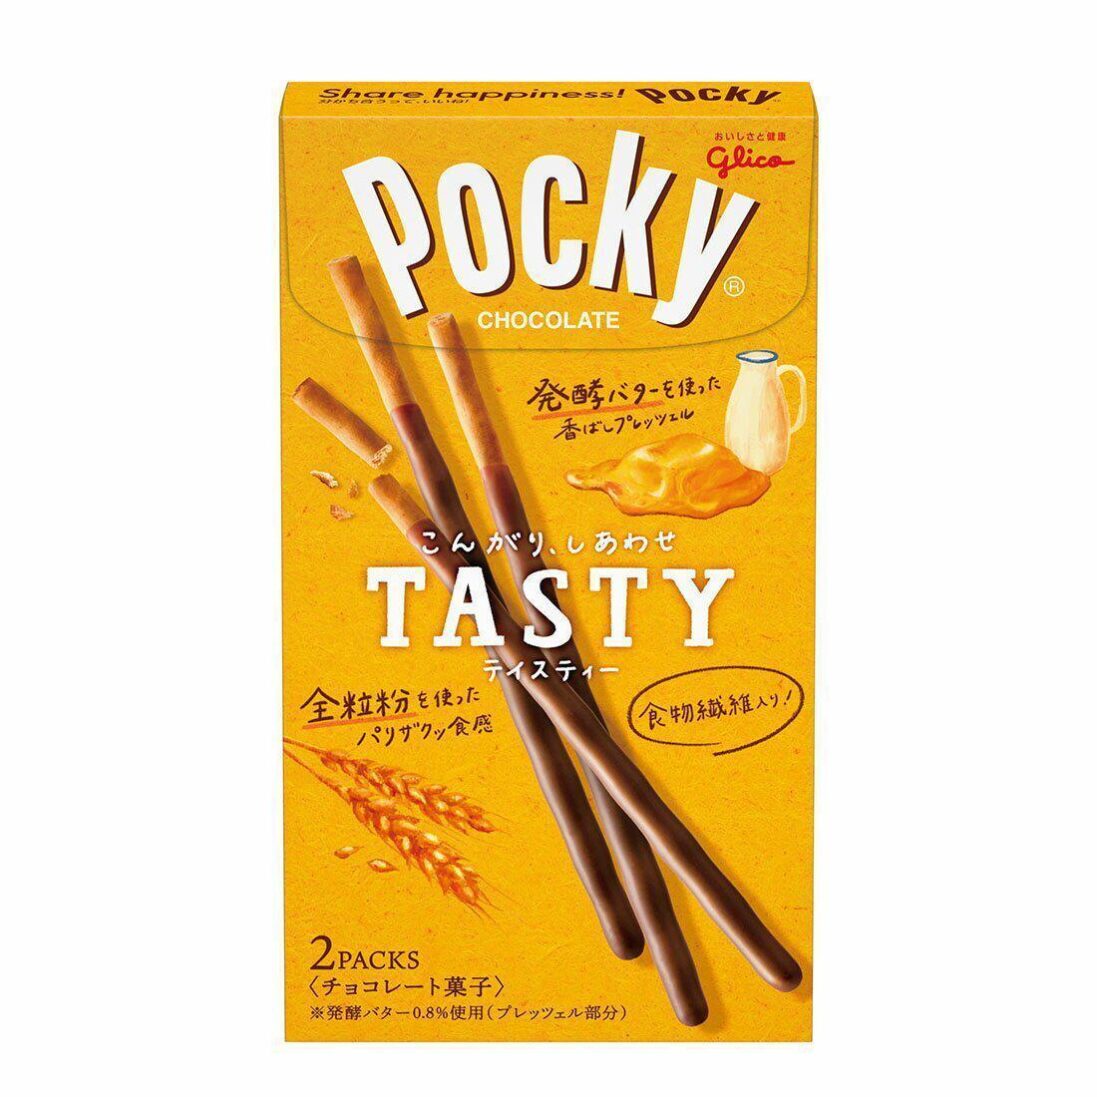 Glico Pocky Tasty Special Chocolate Coated Biscuit Sticks 1 Packet